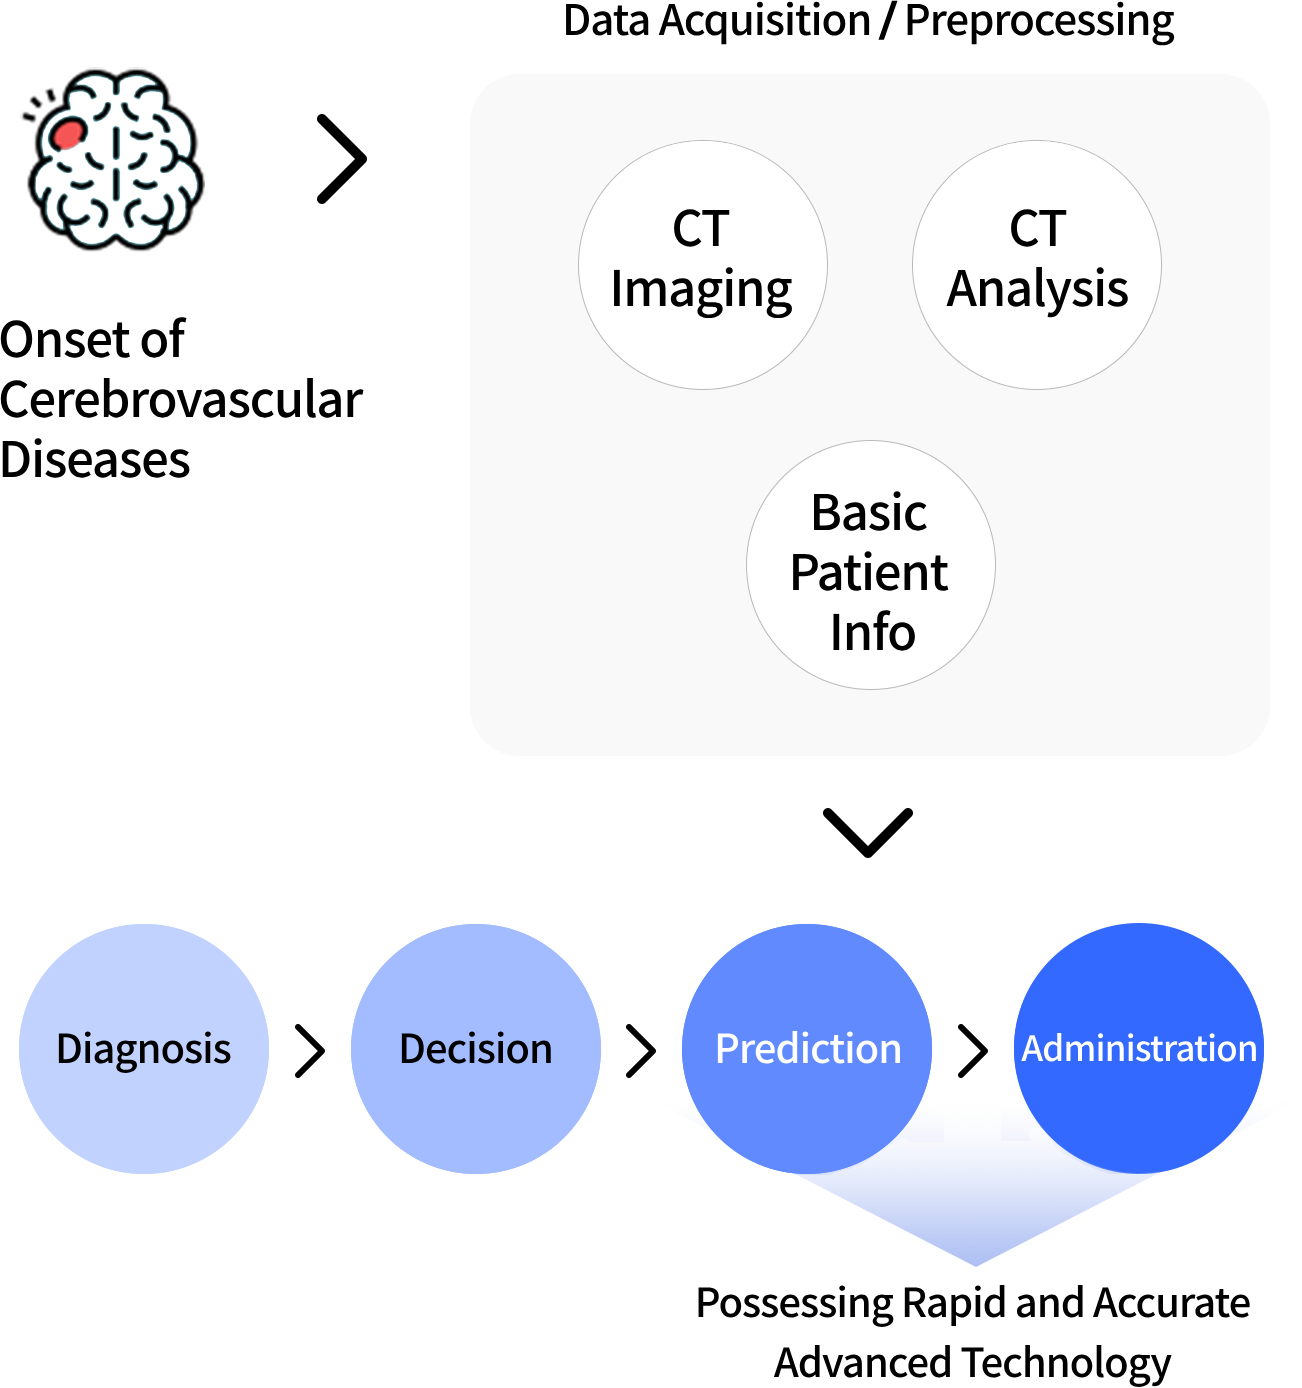 Occurrence of cerebrovascular disease > Data acquisition, preprocessing (CT imaging, CT analysis, basic patient information) > Diagnosis > Decision > Prediction > Administration